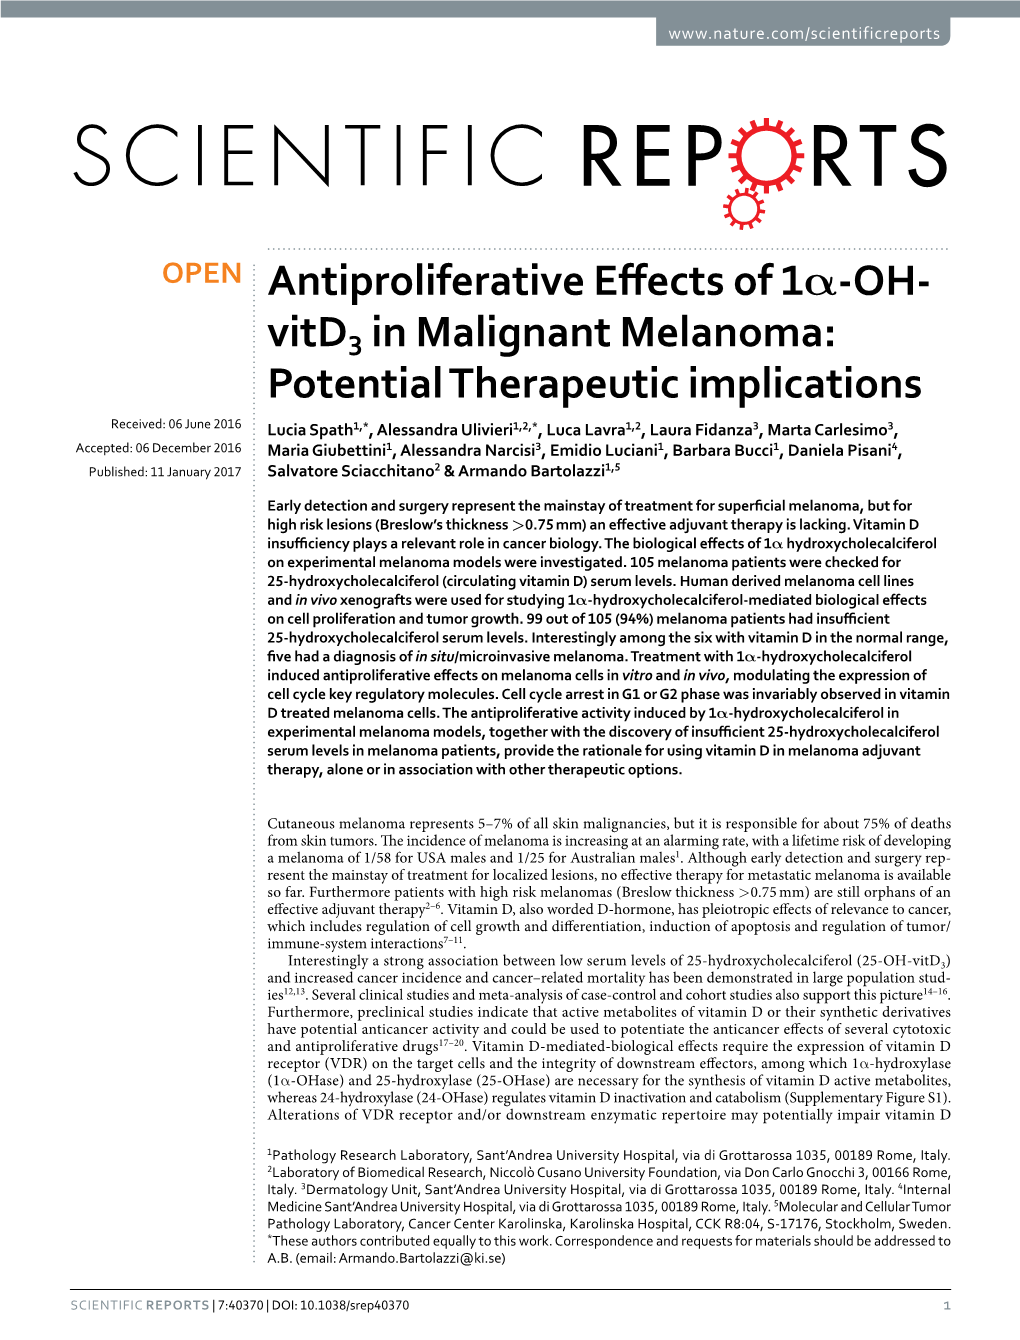 Antiproliferative Effects of 1Α-OH-Vitd3 in Malignant Melanoma: Potential Therapeutic Implications